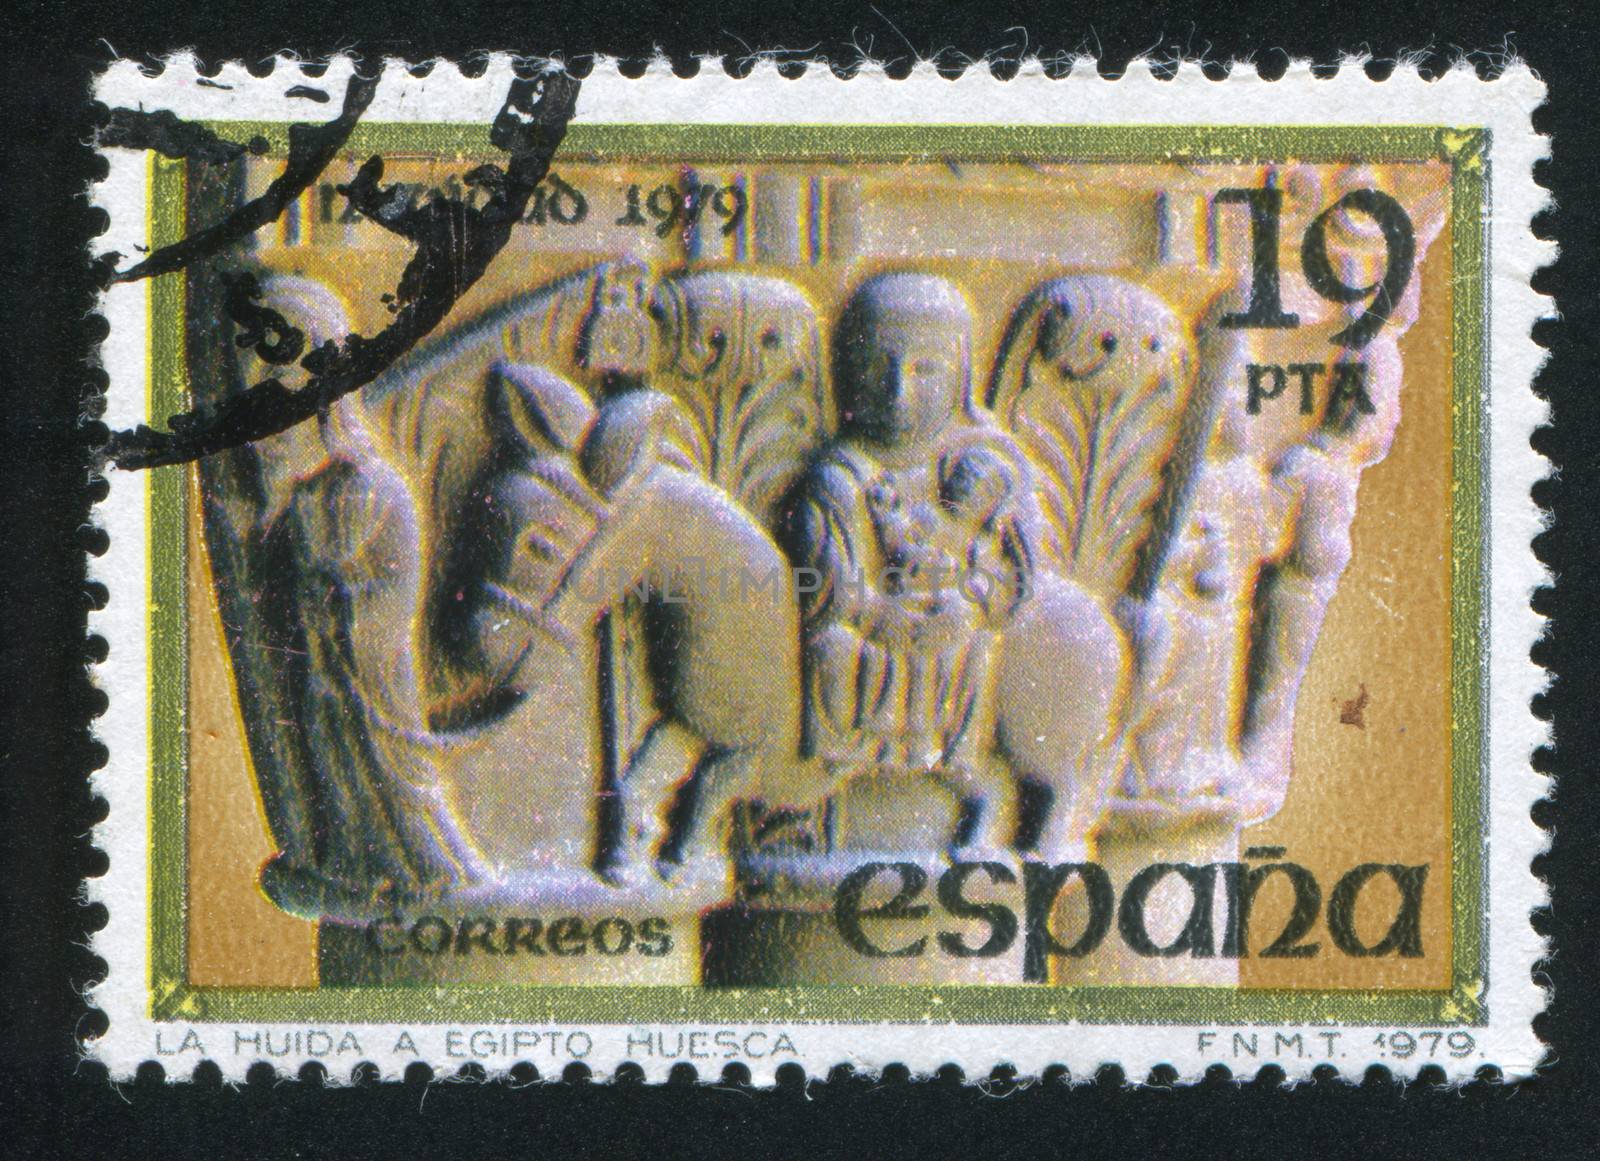 SPAIN - CIRCA 1979: stamp printed by Spain, shows Flight into Egypt, Column from St. Peter the Elder, Huesca, circa 1979